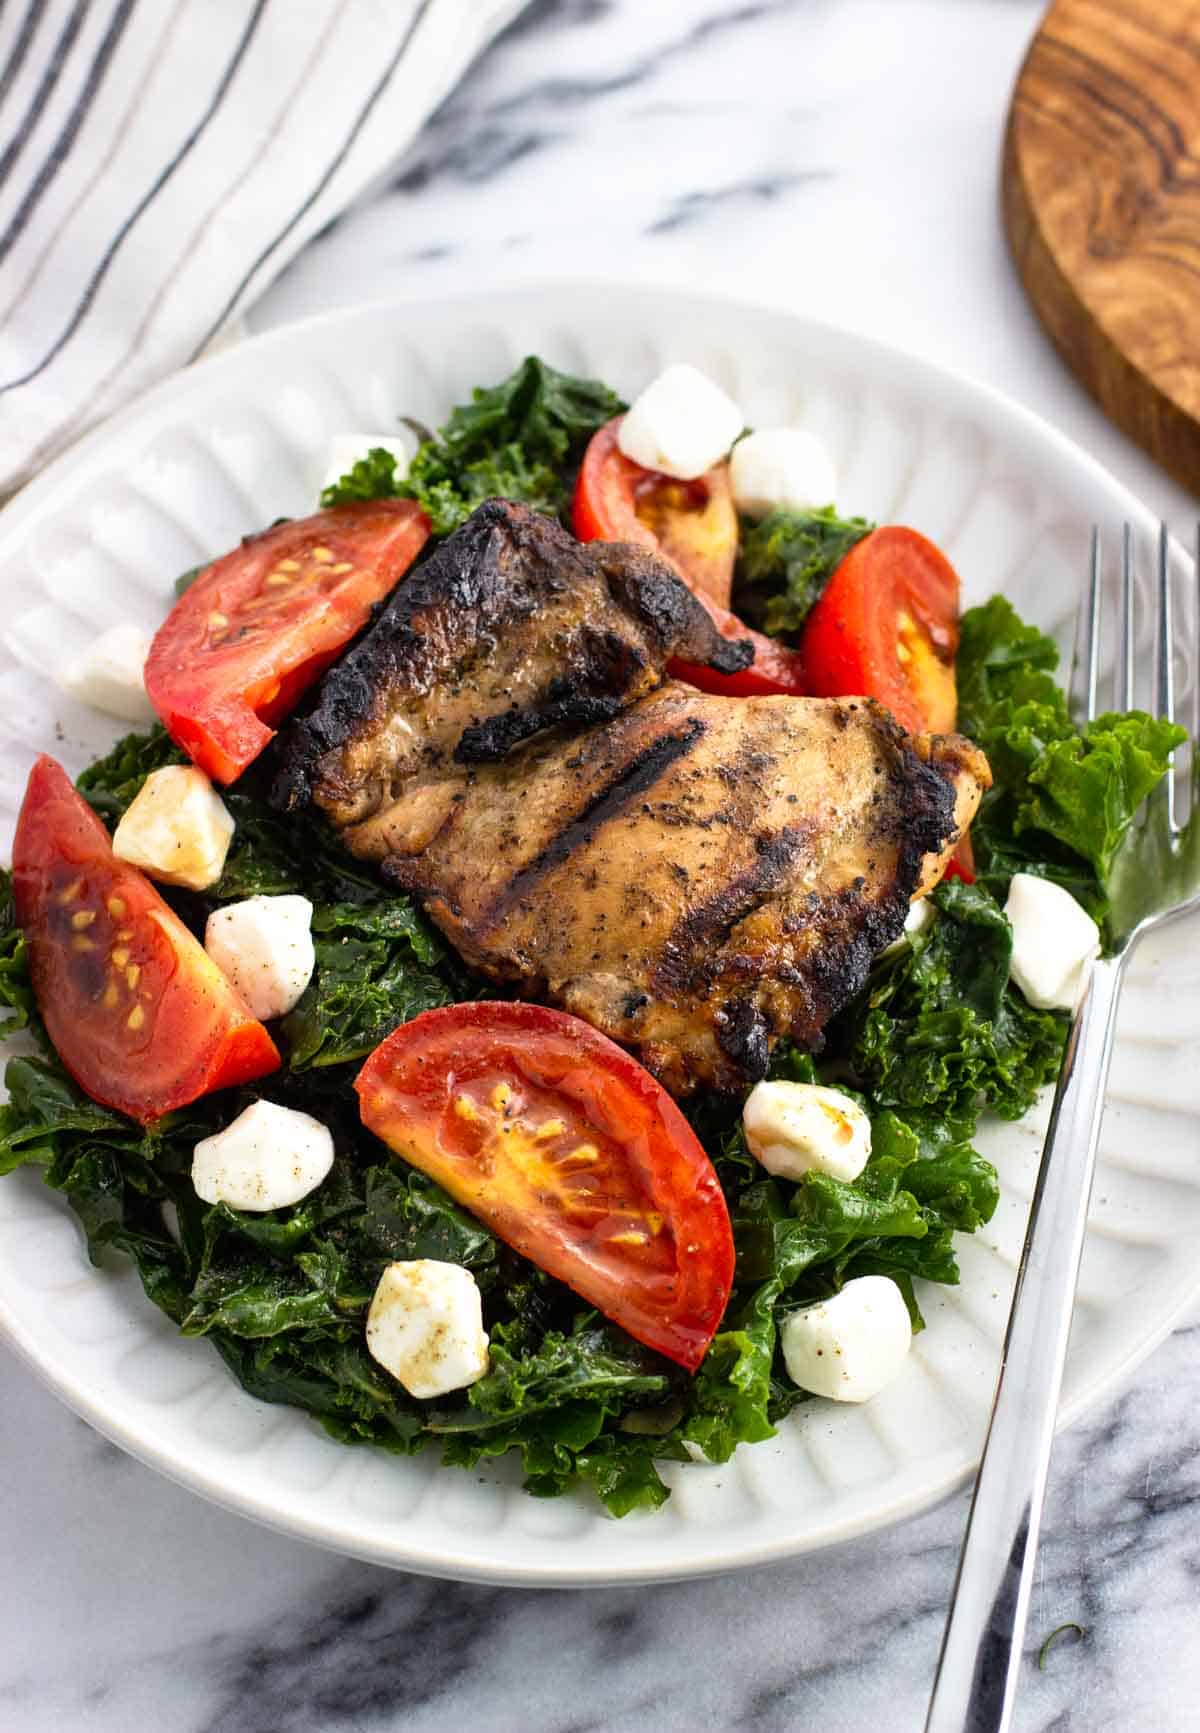 A grilled chicken thigh on marinated kale caprese salad.